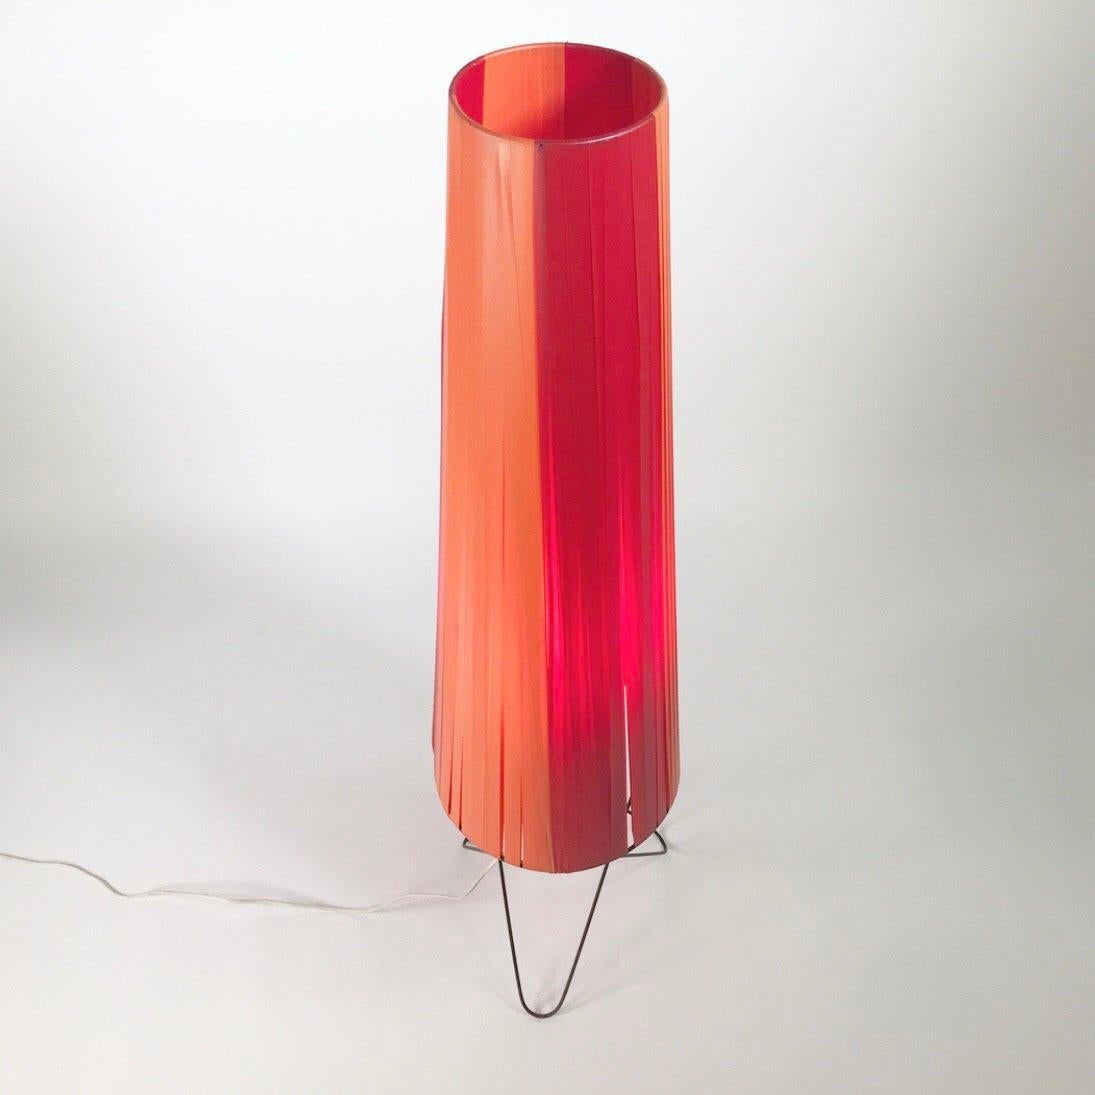 Beautiful eye-catching floor lamp by Nisse Strinning 1950s, Sweden. 

Black lacquered tube steel base with a shade that is made of red and orange plastic strings. The chimney shaped large shade has the typical 1950s look. 

When lit the